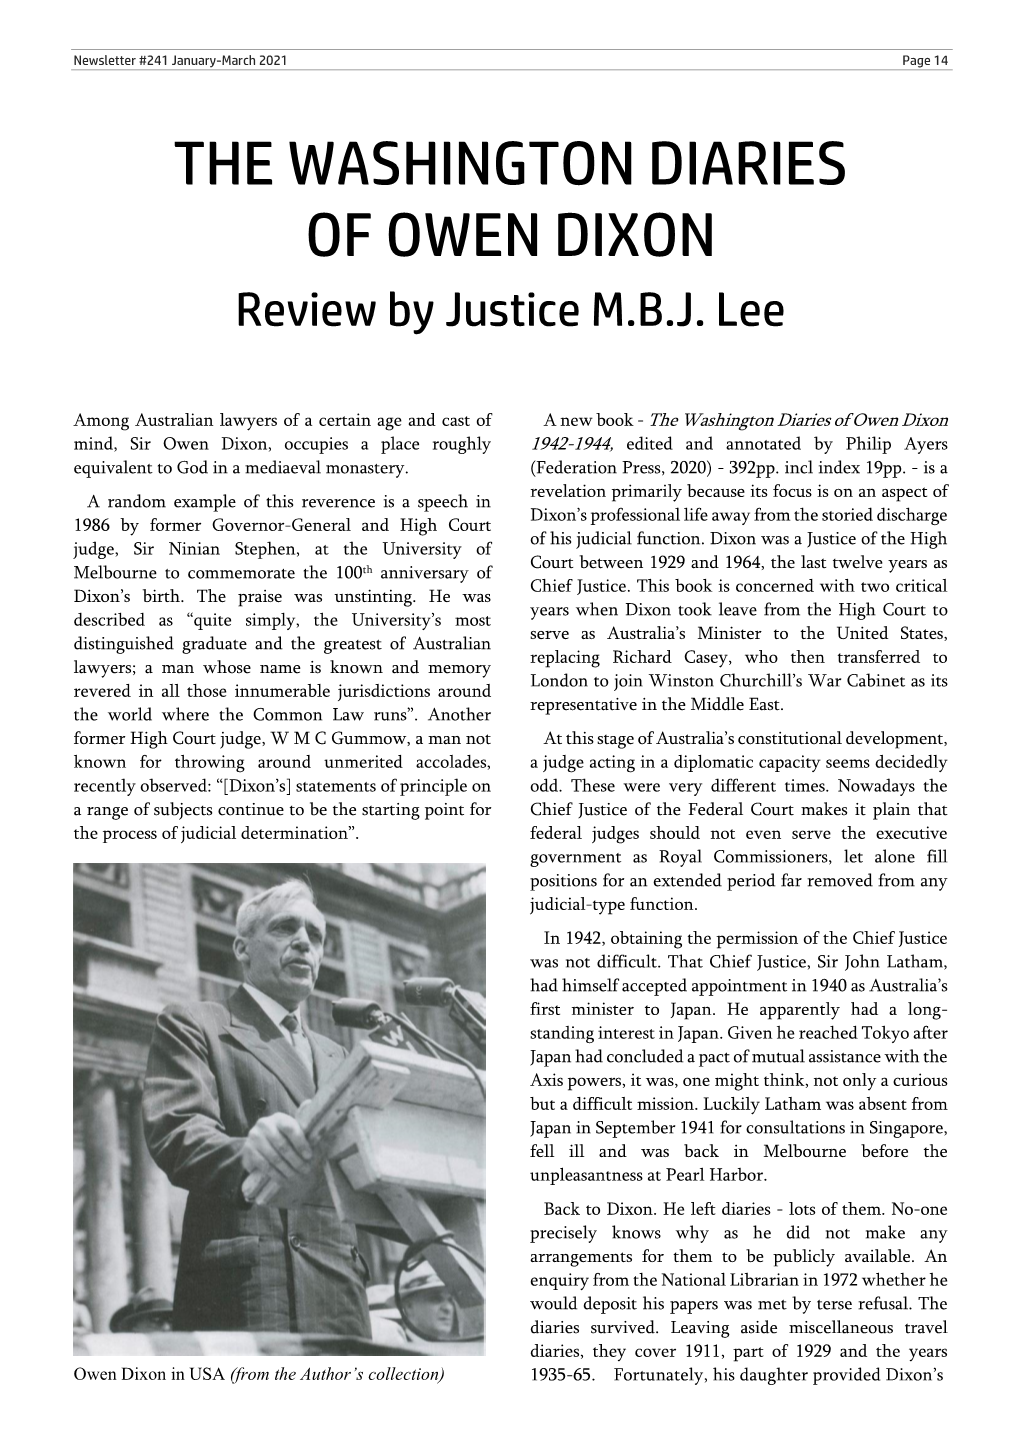 THE WASHINGTON DIARIES of OWEN DIXON Review by Justice M.B.J